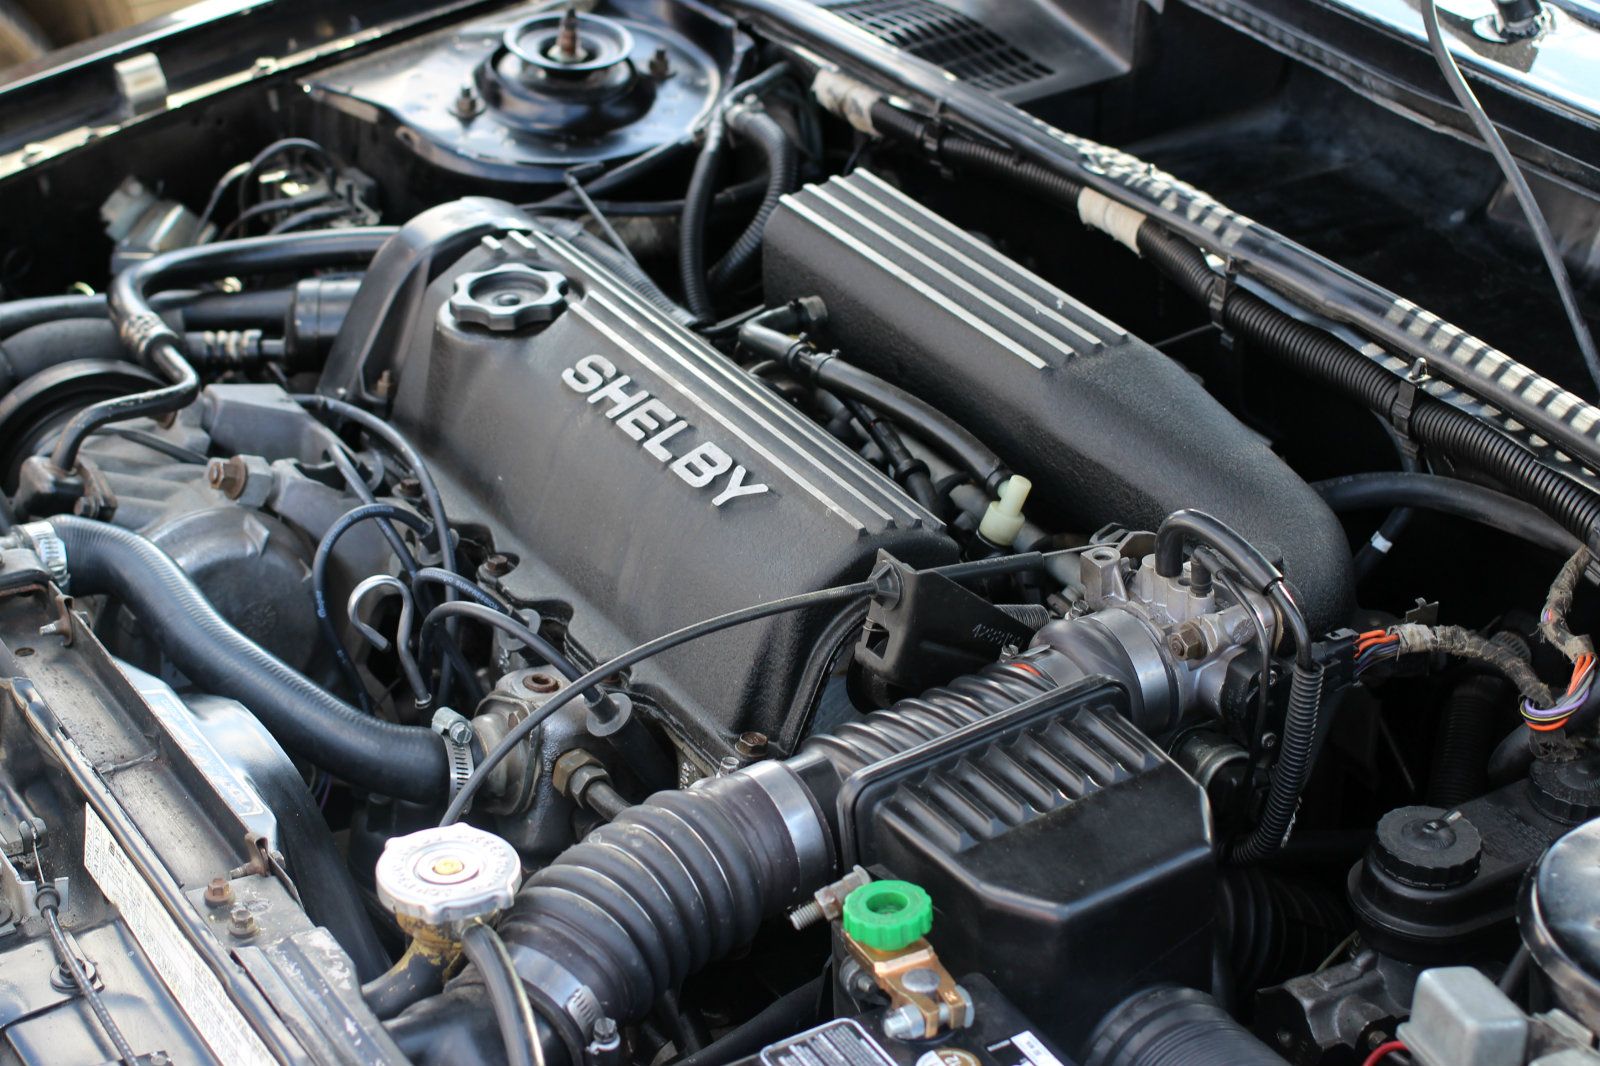 1987_Shelby_GLHS_engine_(14200808923)